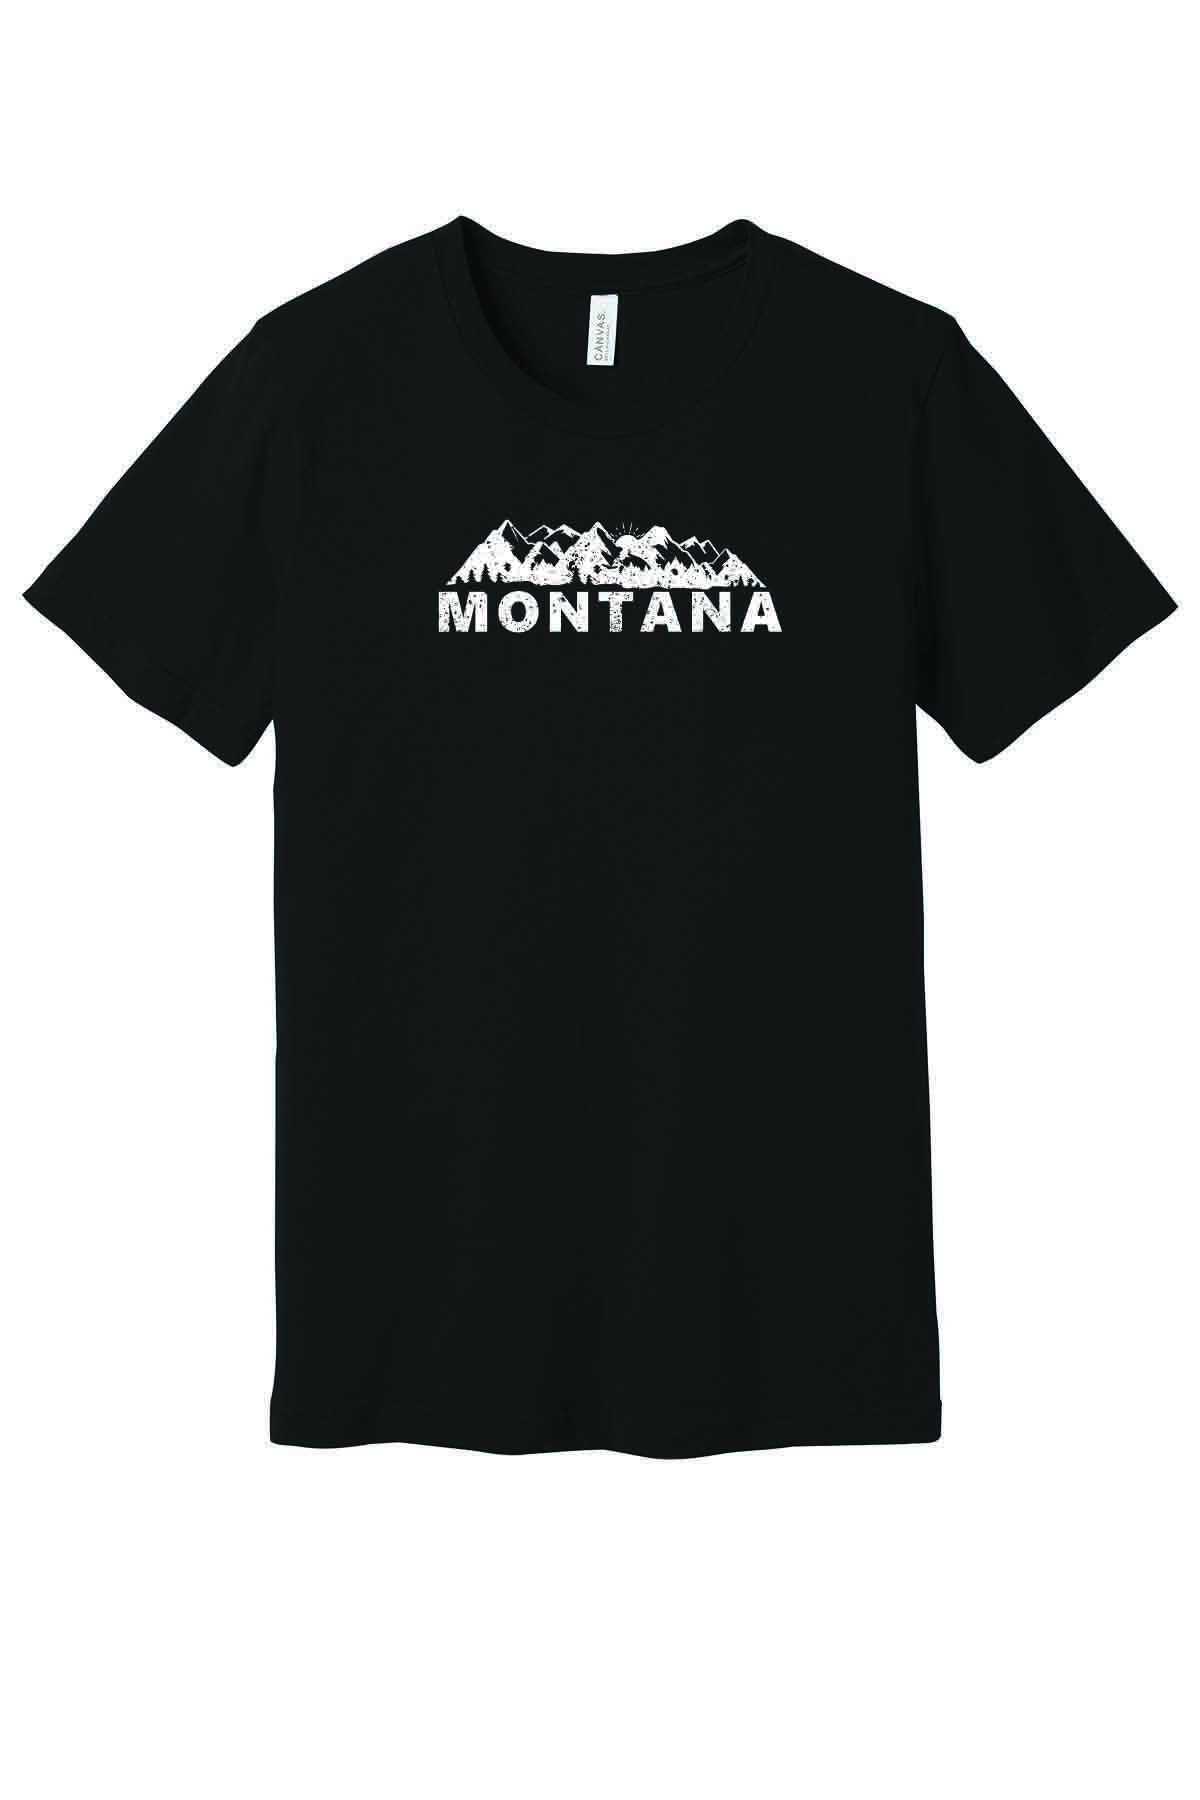 Featured image for “Tourist Tee Montana Mountains Distressed (Multiple Colors)”